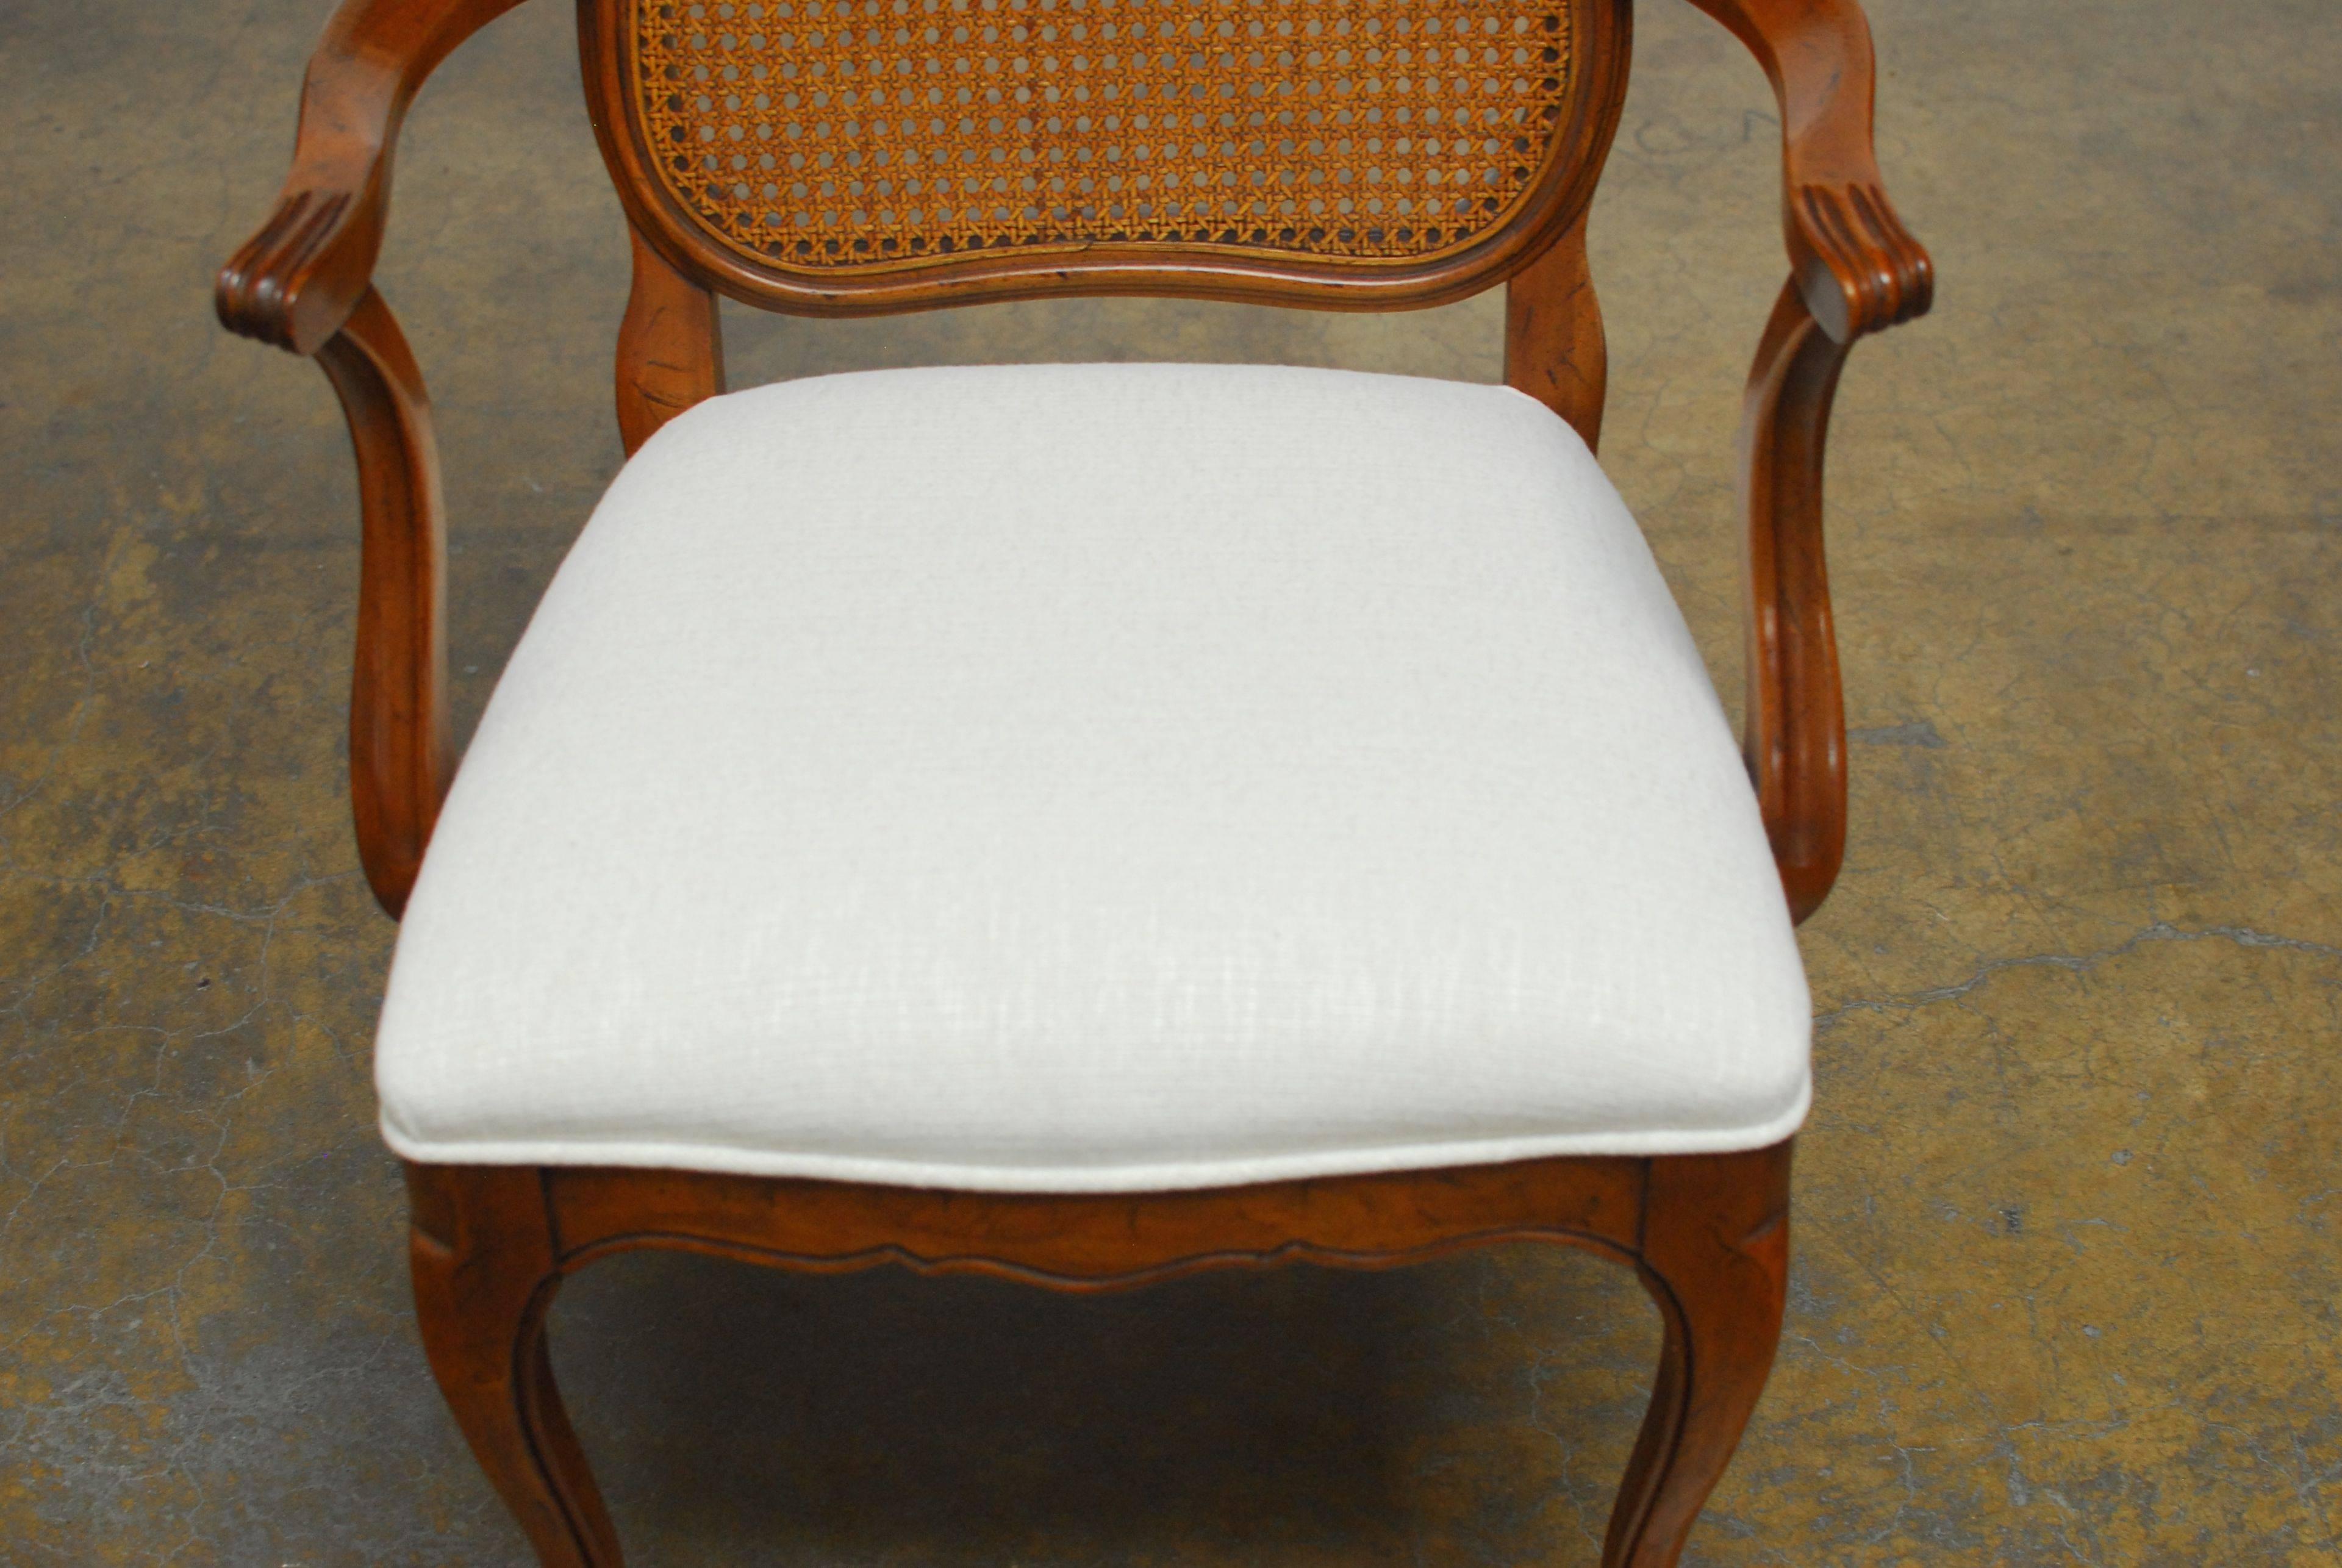 Exquisite set of eight dining chairs consisting of six side chairs and two armchairs featuring a caned back. Made in the Louis XV style with cabriole legs and a scalloped apron. Freshly reupholstered in a white chenille and exceedingly well made